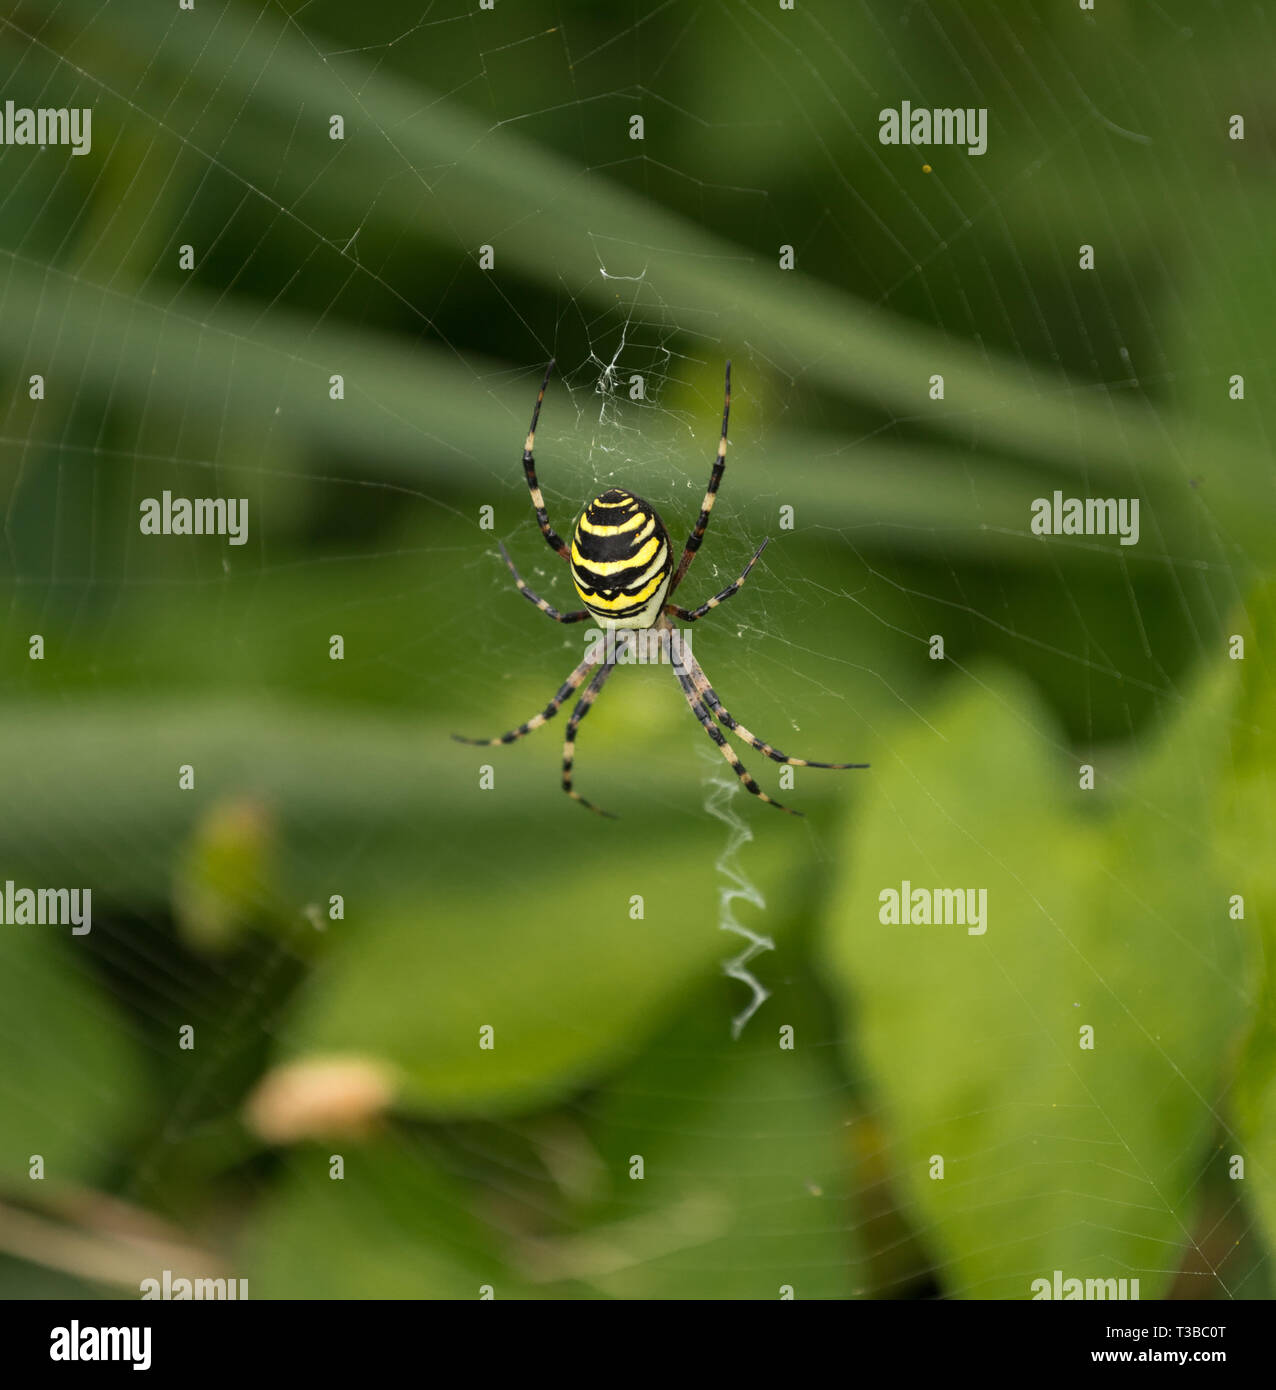 Wasp Spider in web Stock Photo